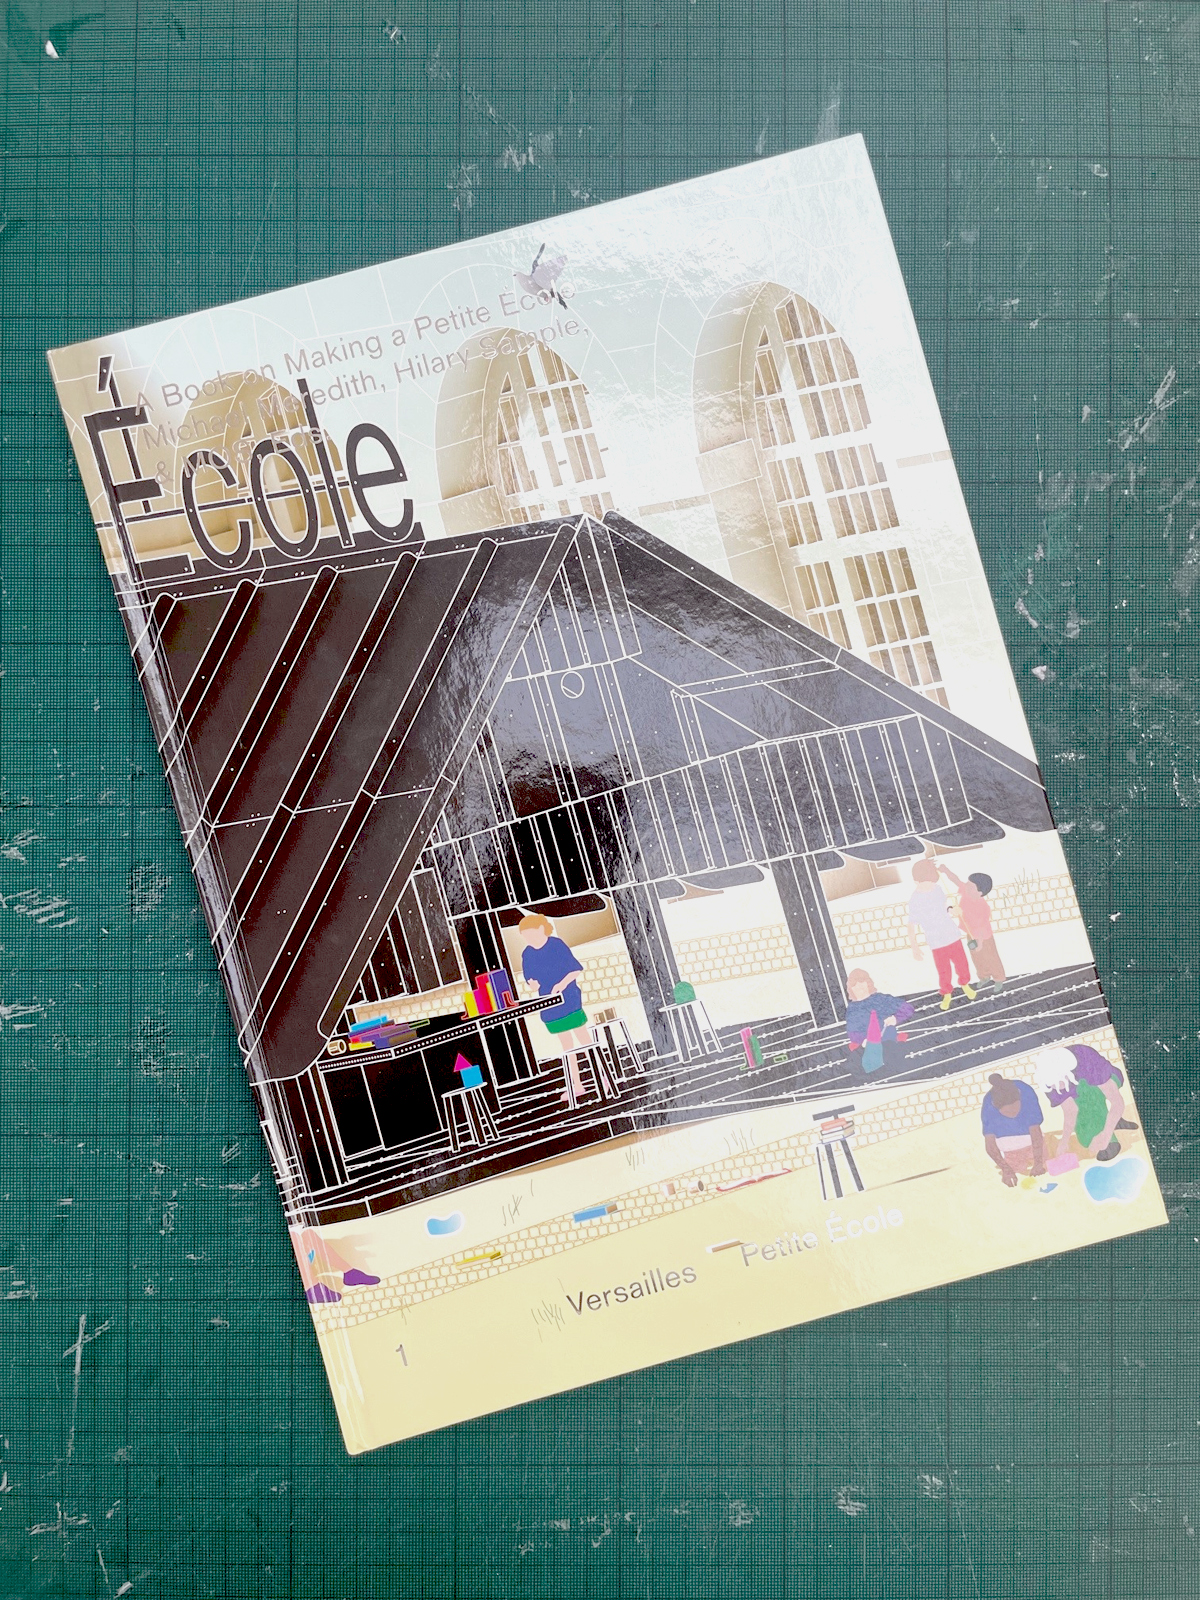 A Book on Making a Petite École